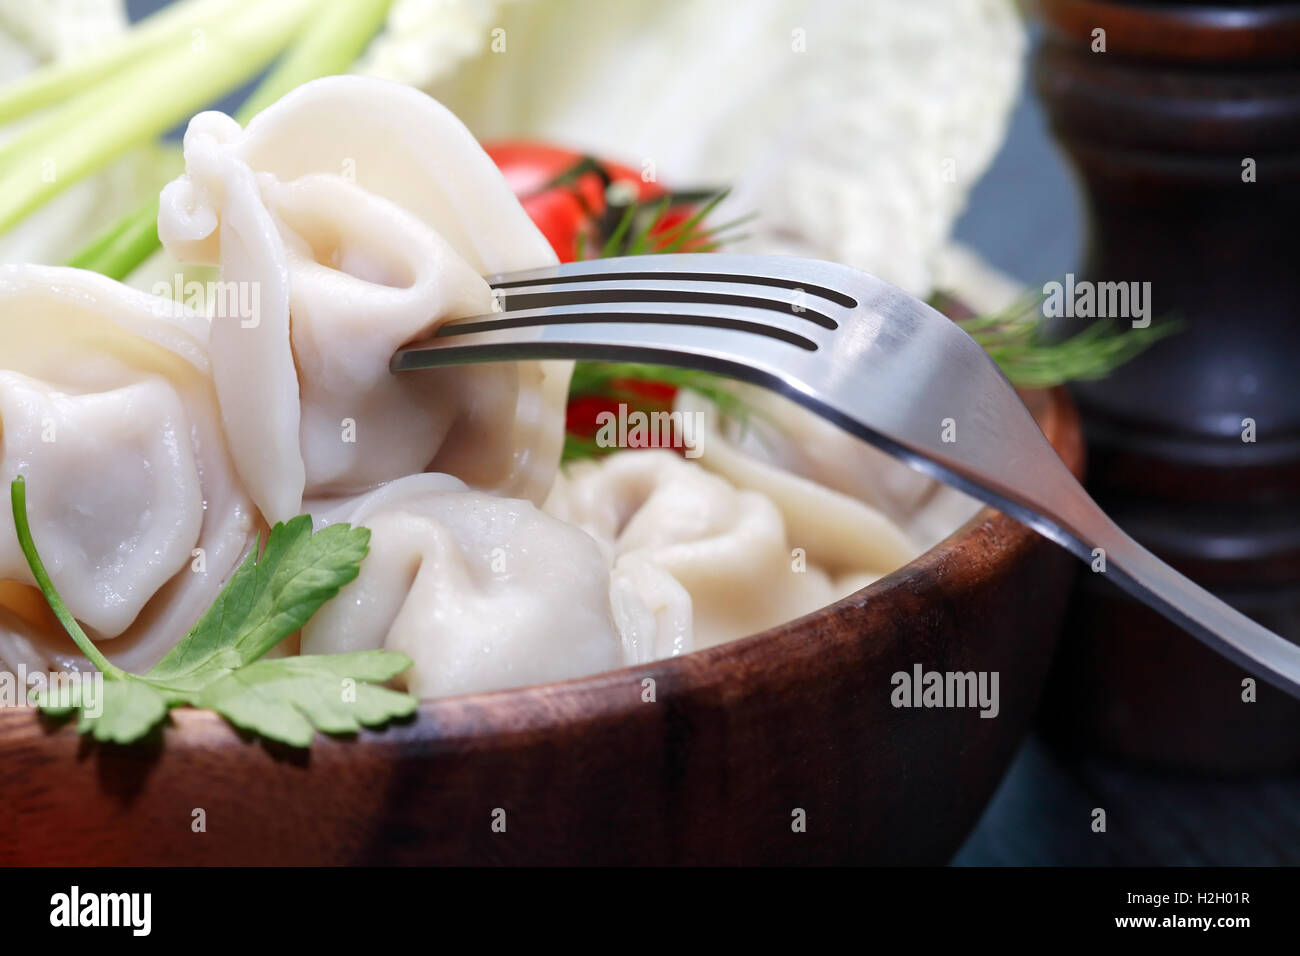 Closeup of fork near dish with ravioli and vegetables Stock Photo